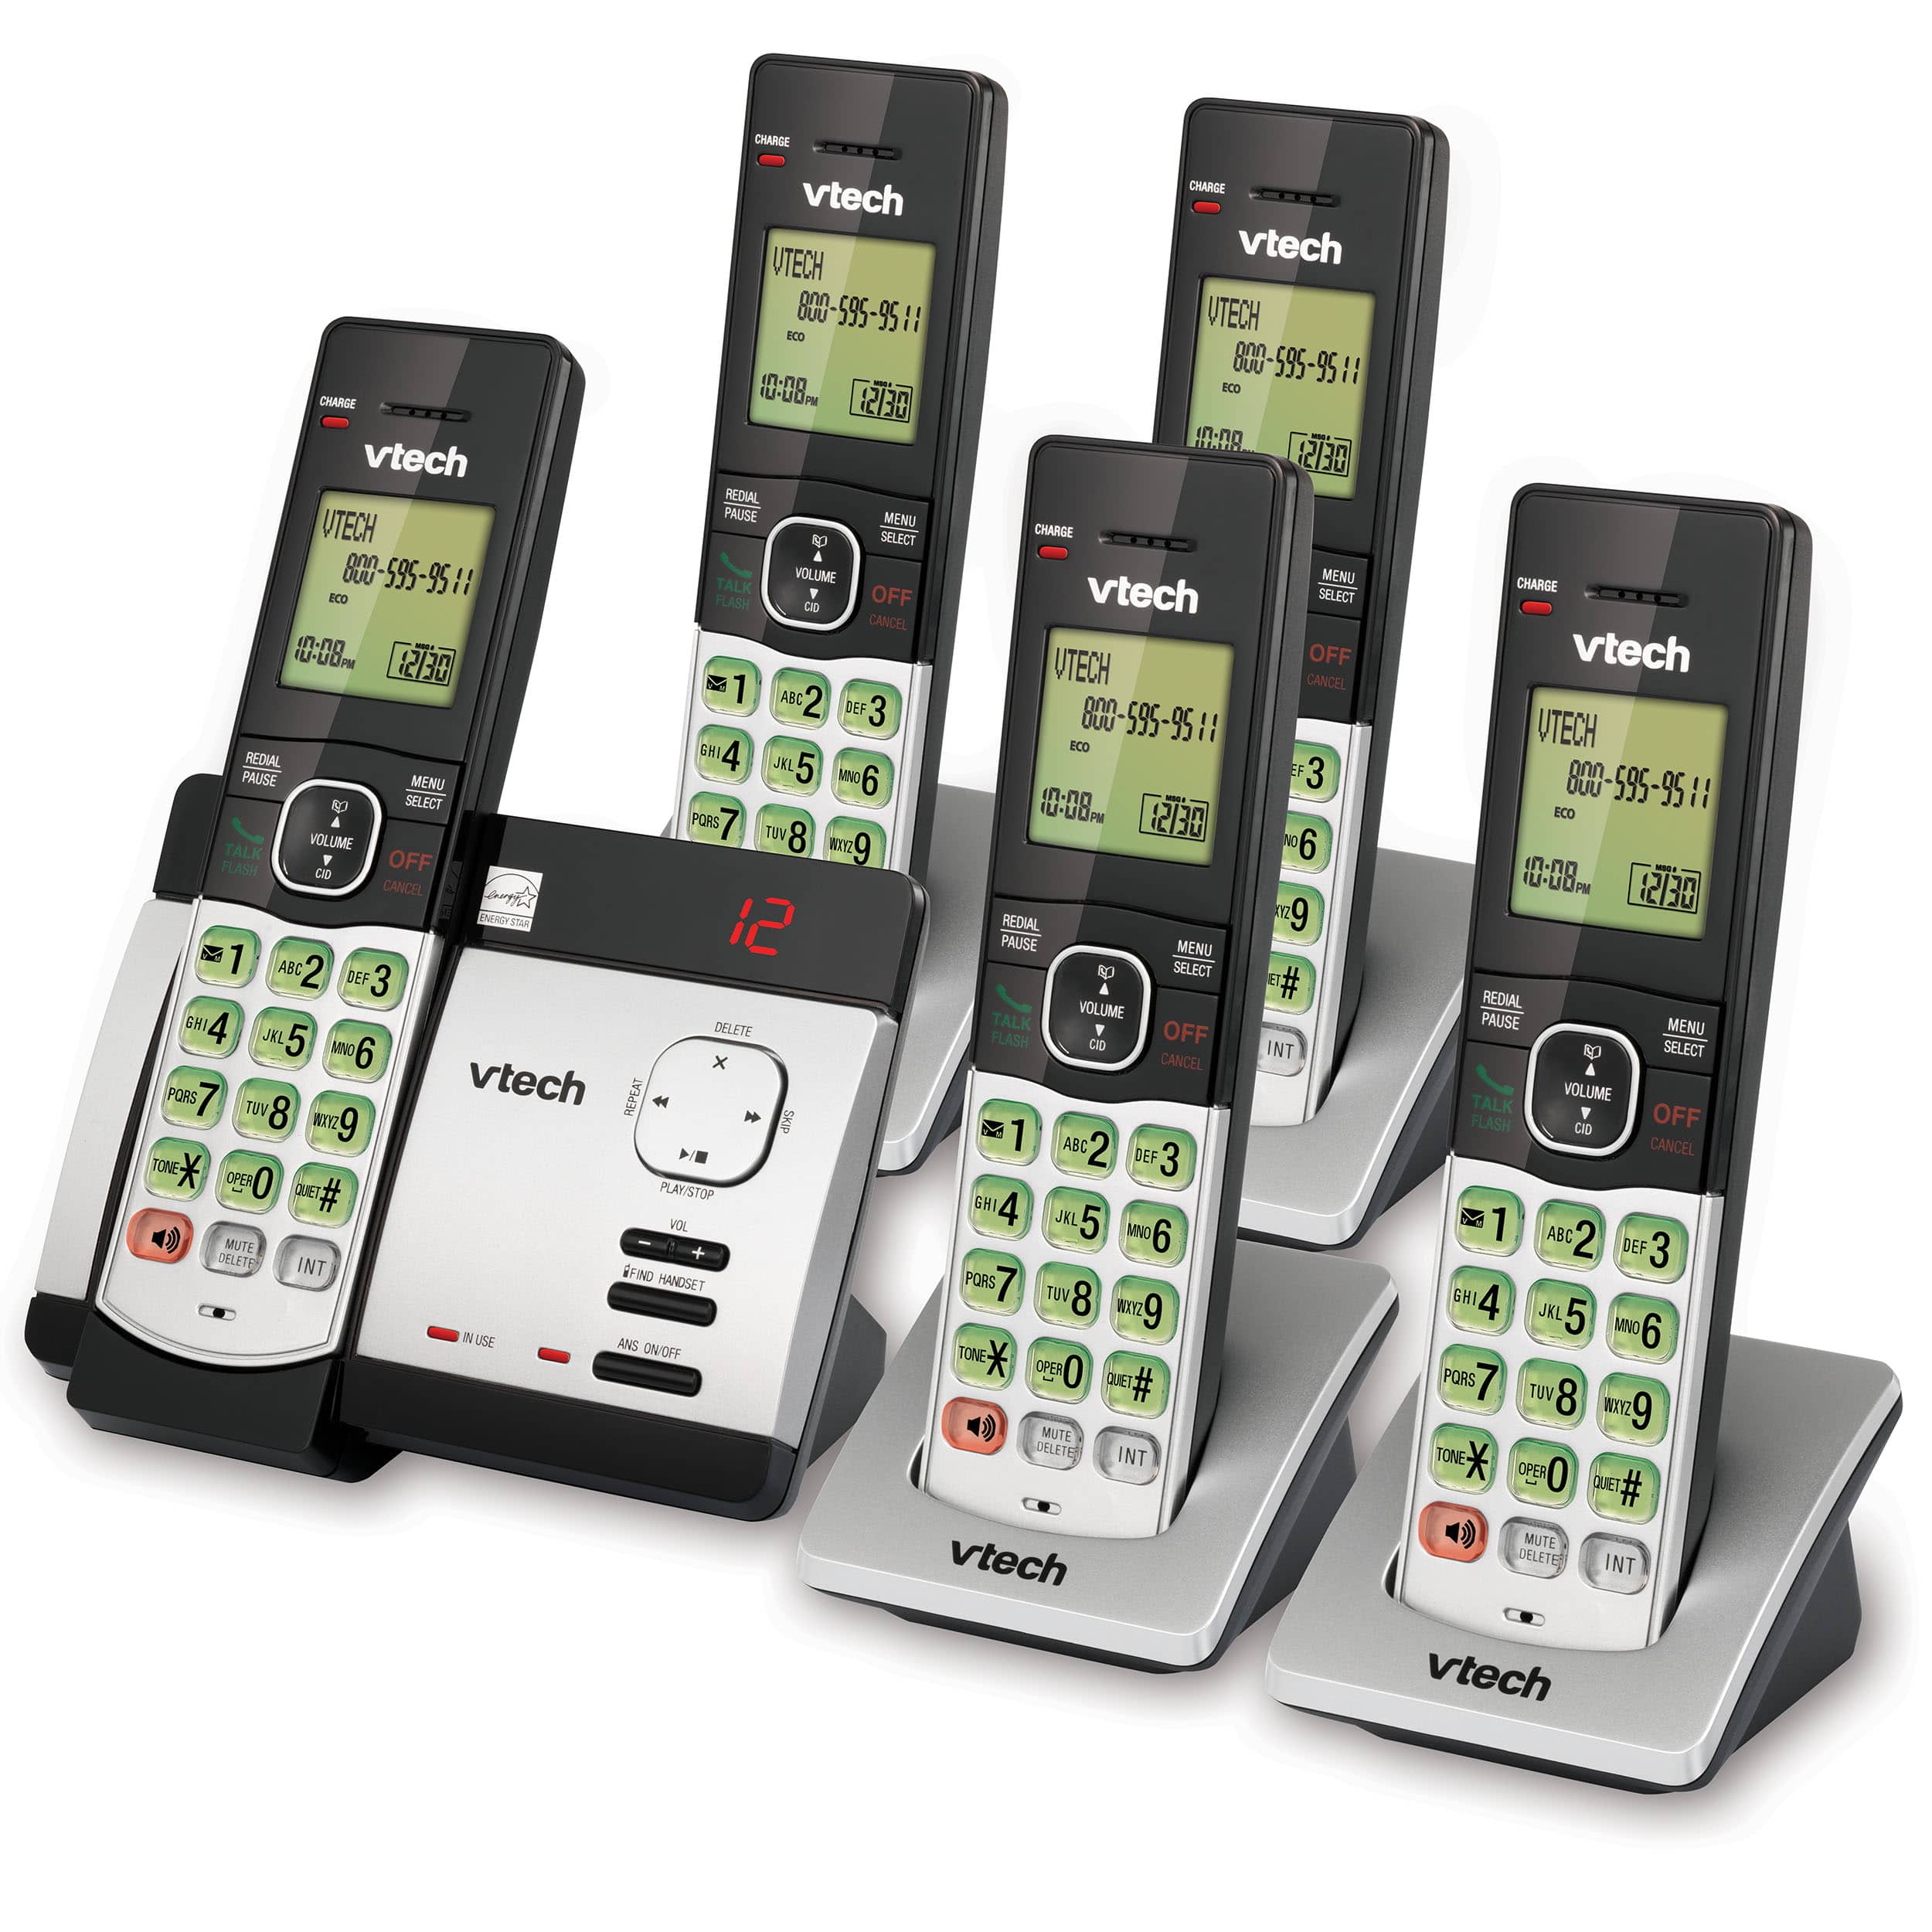 5 Handset Cordless Phone System with Caller ID/Call Waiting